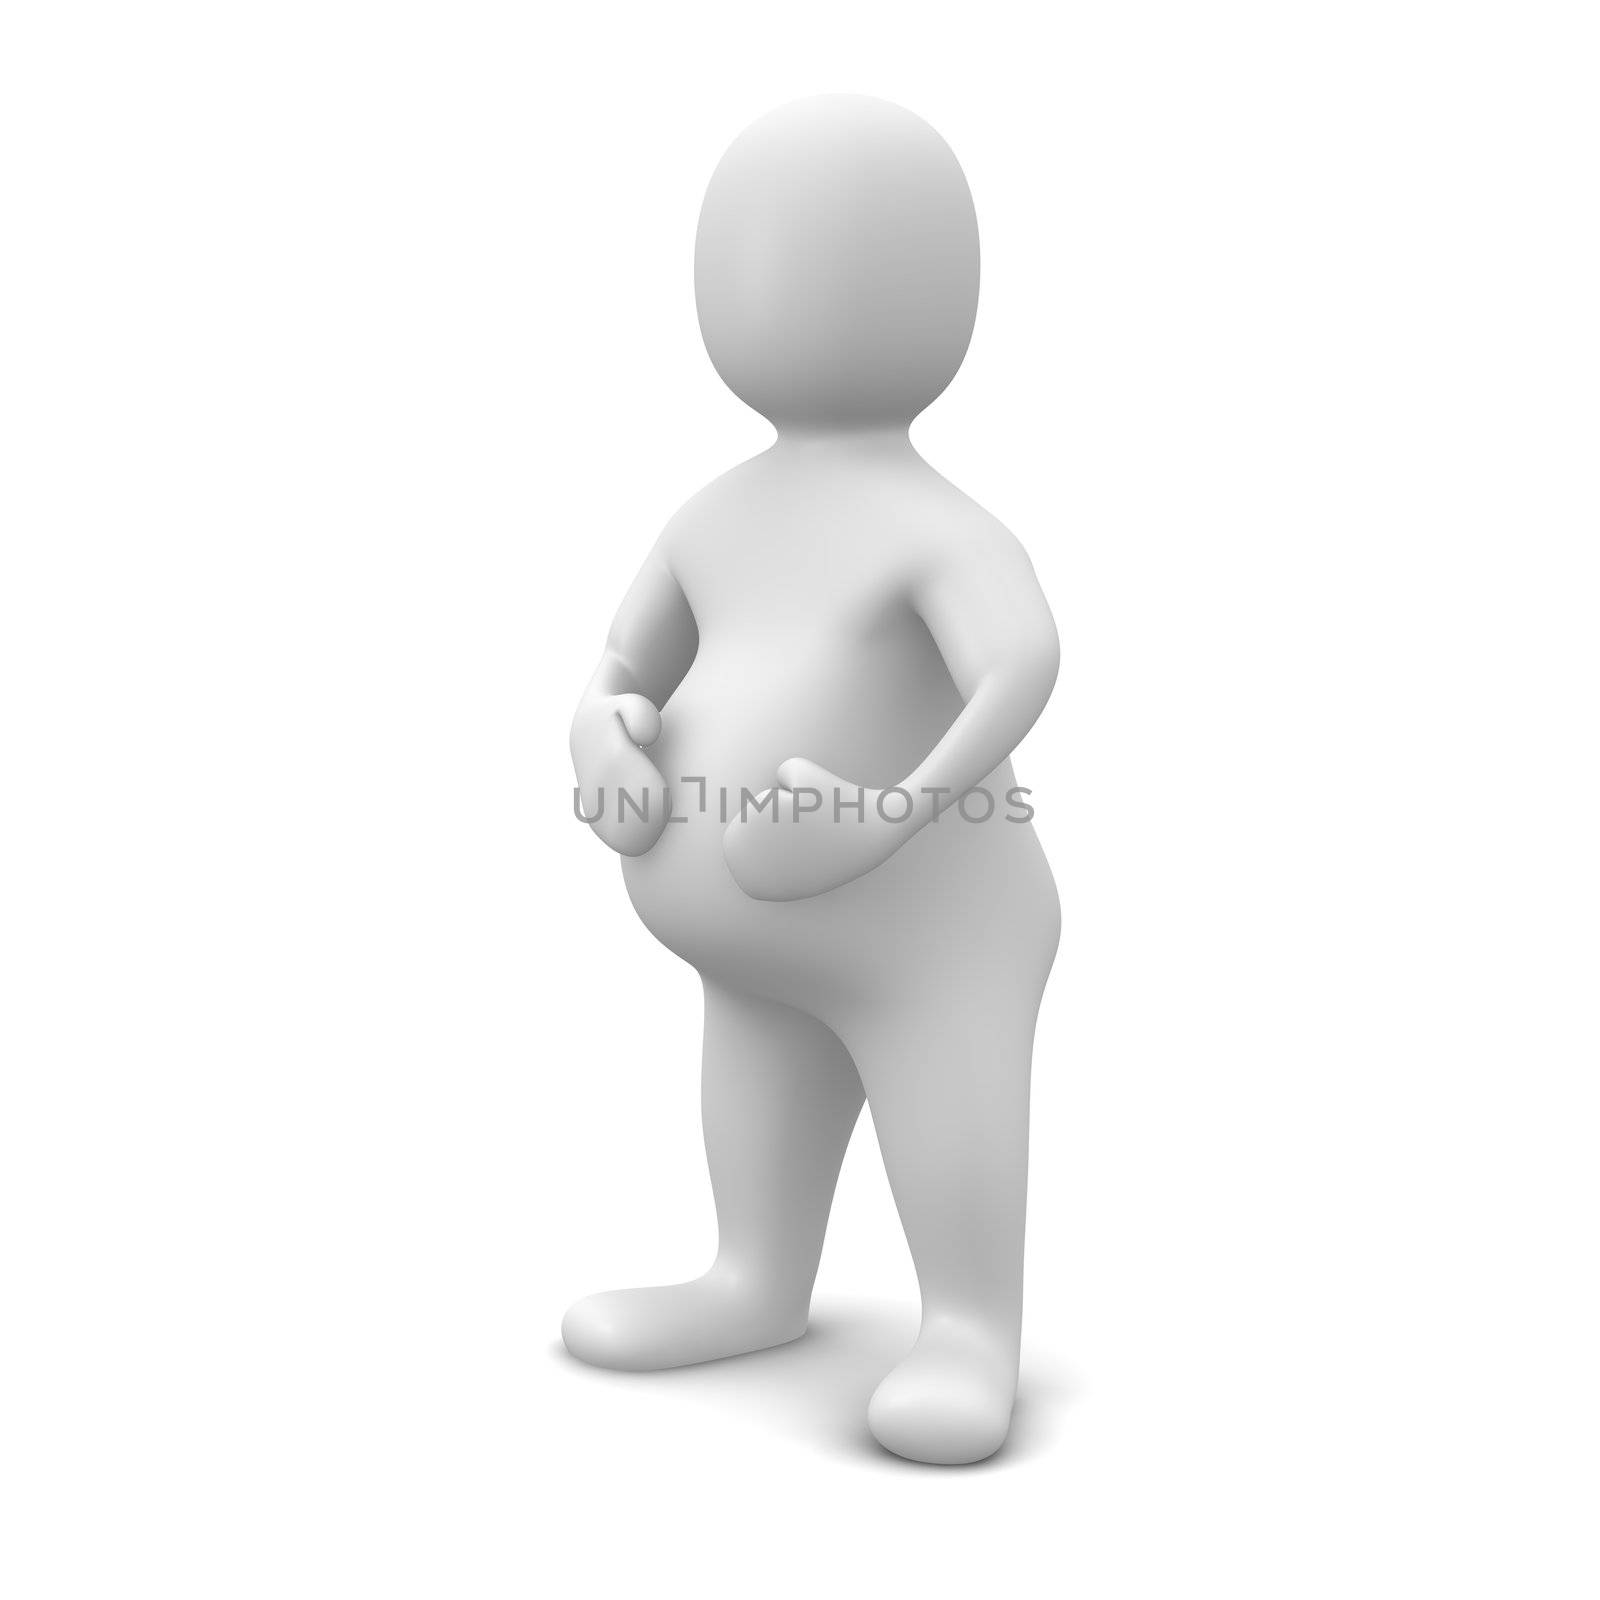 Fat man isolated on white. 3d rendered illustration.